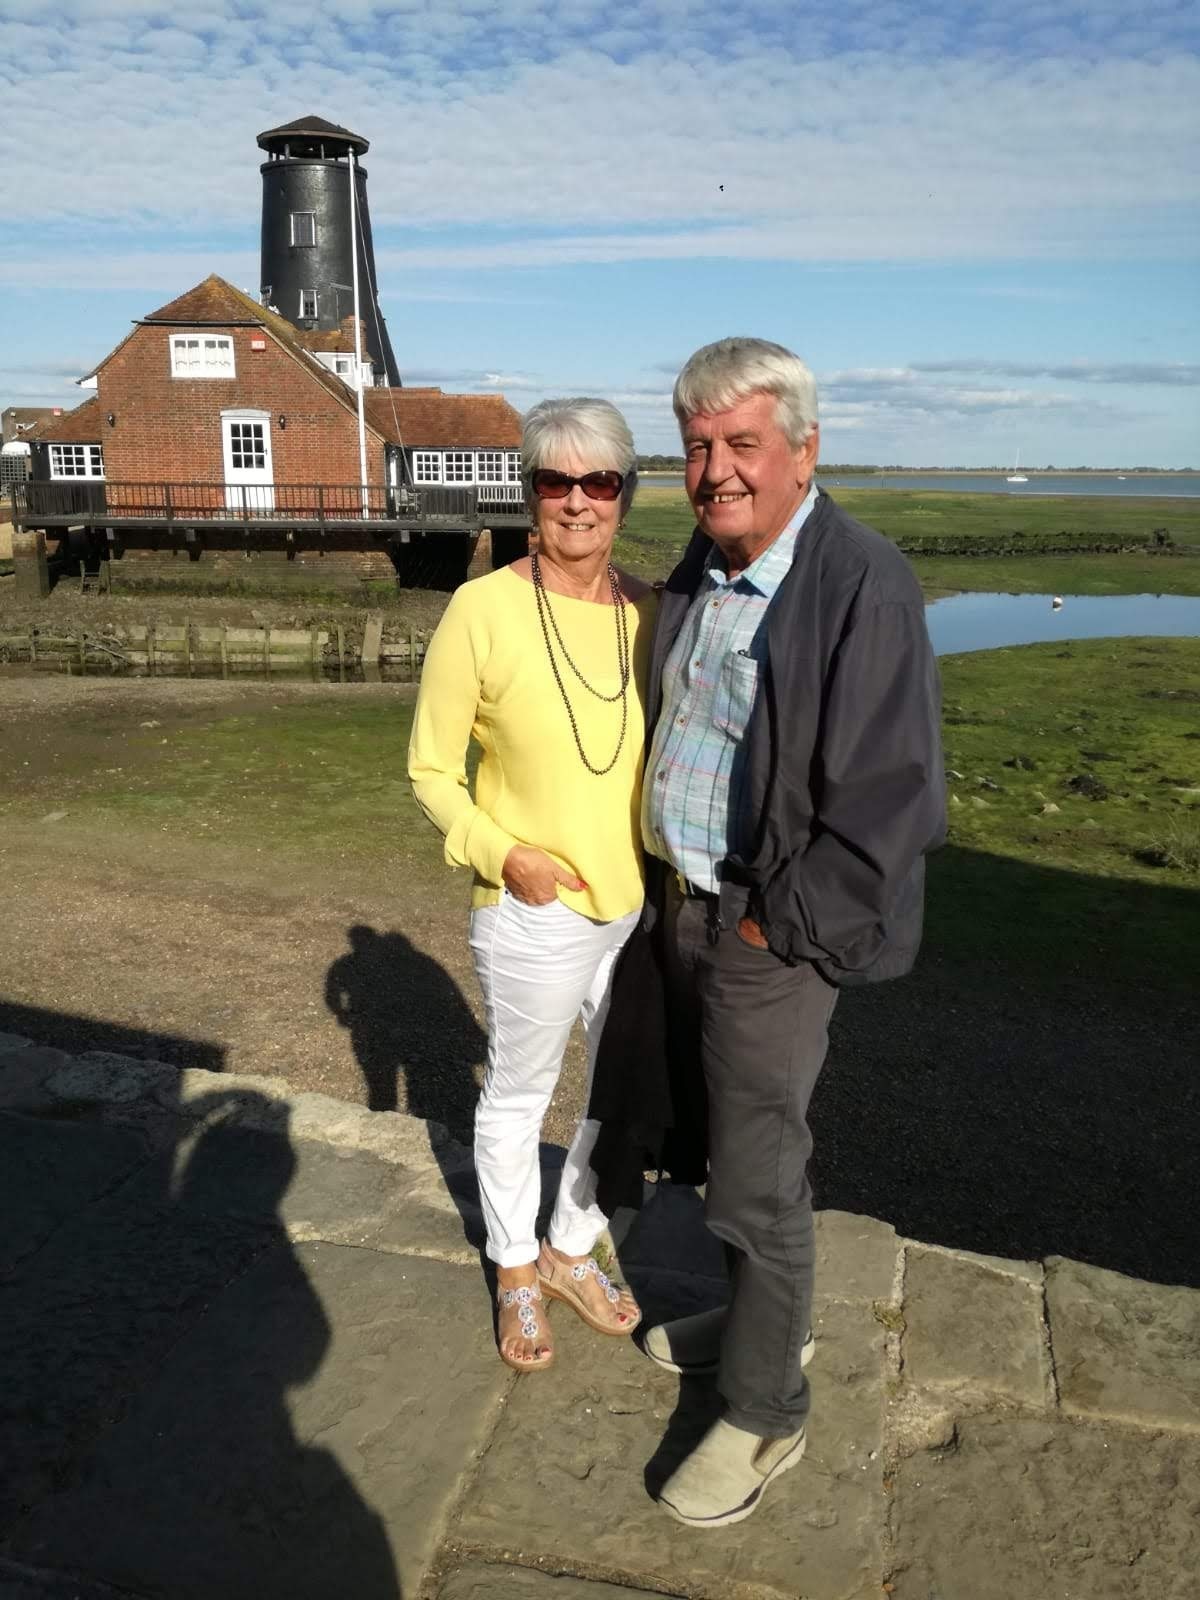 Noreen Wileman pictured here with partner Mike Potter in Bognor